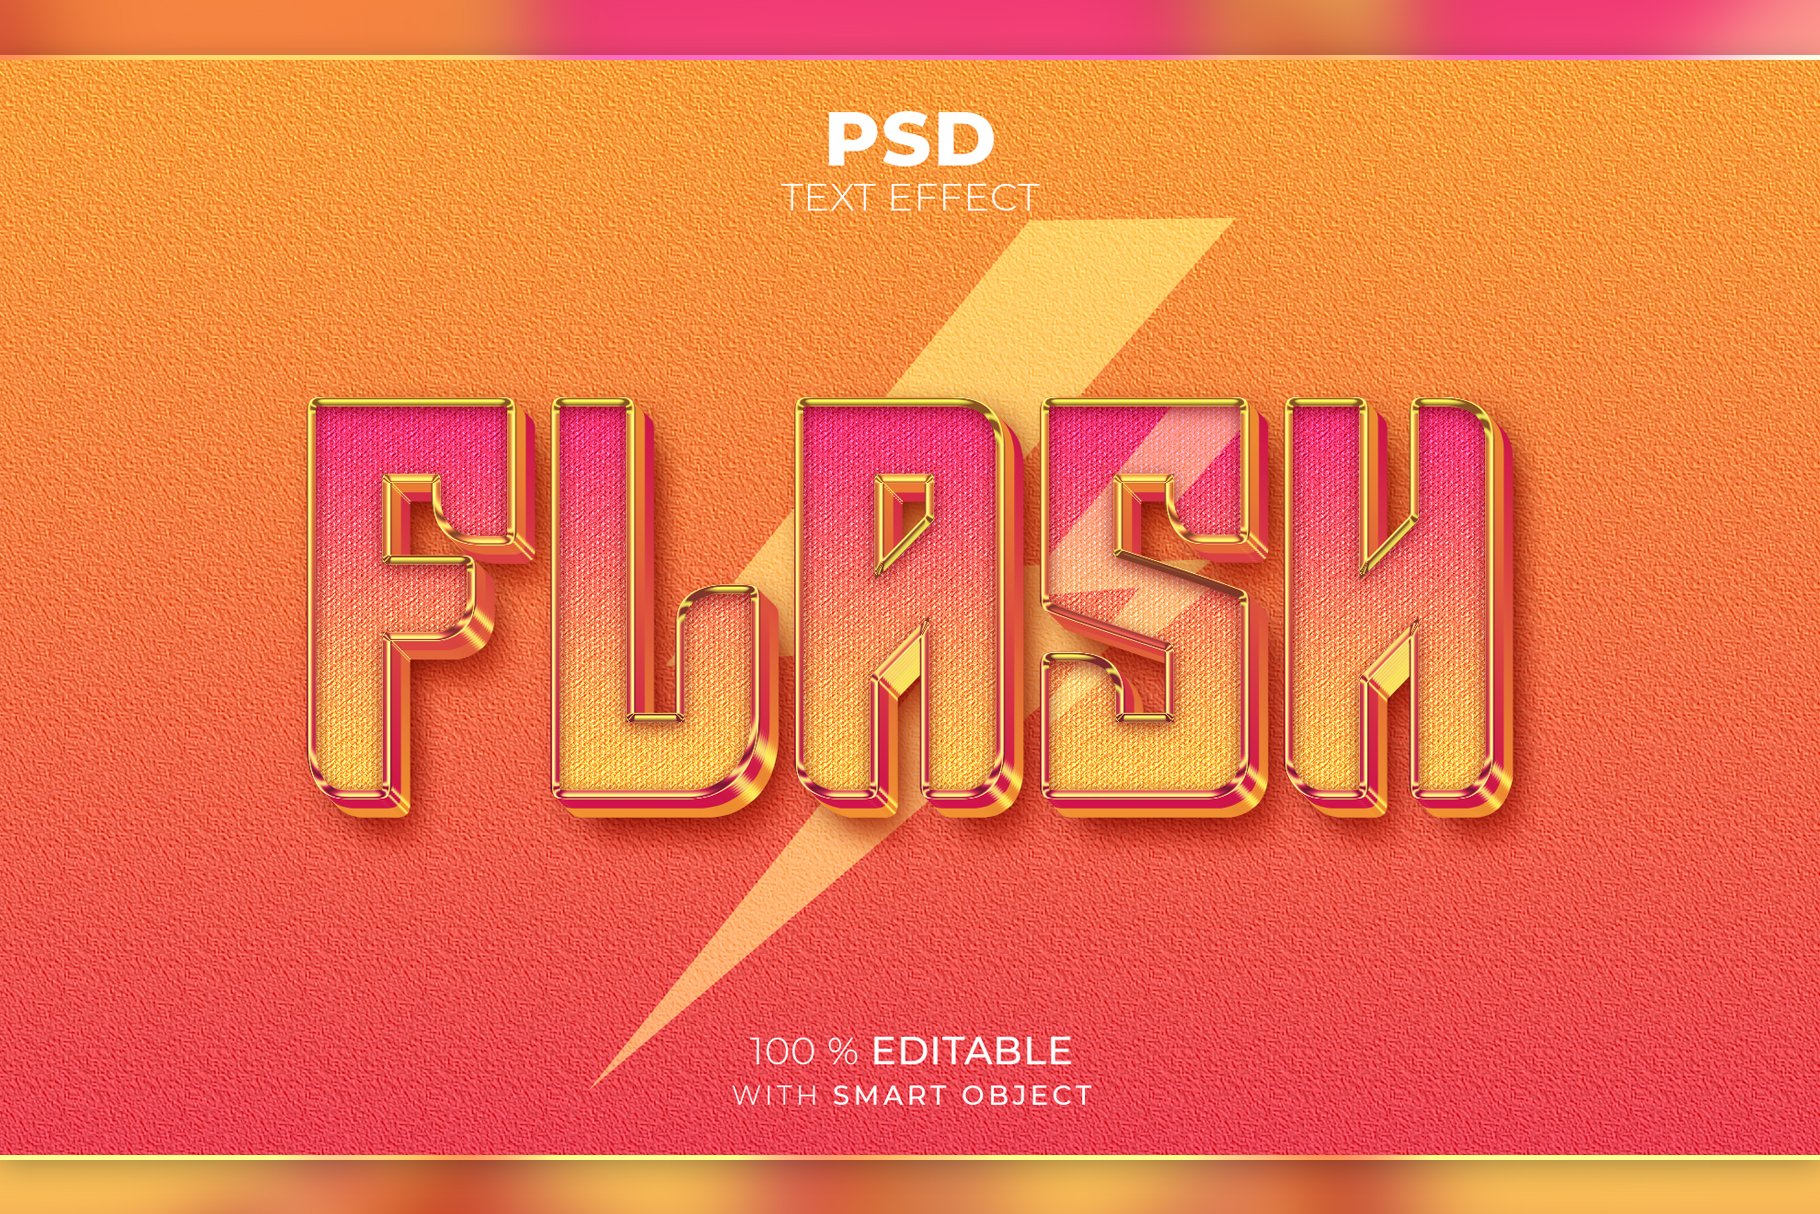 Flash 3D editable text effectcover image.